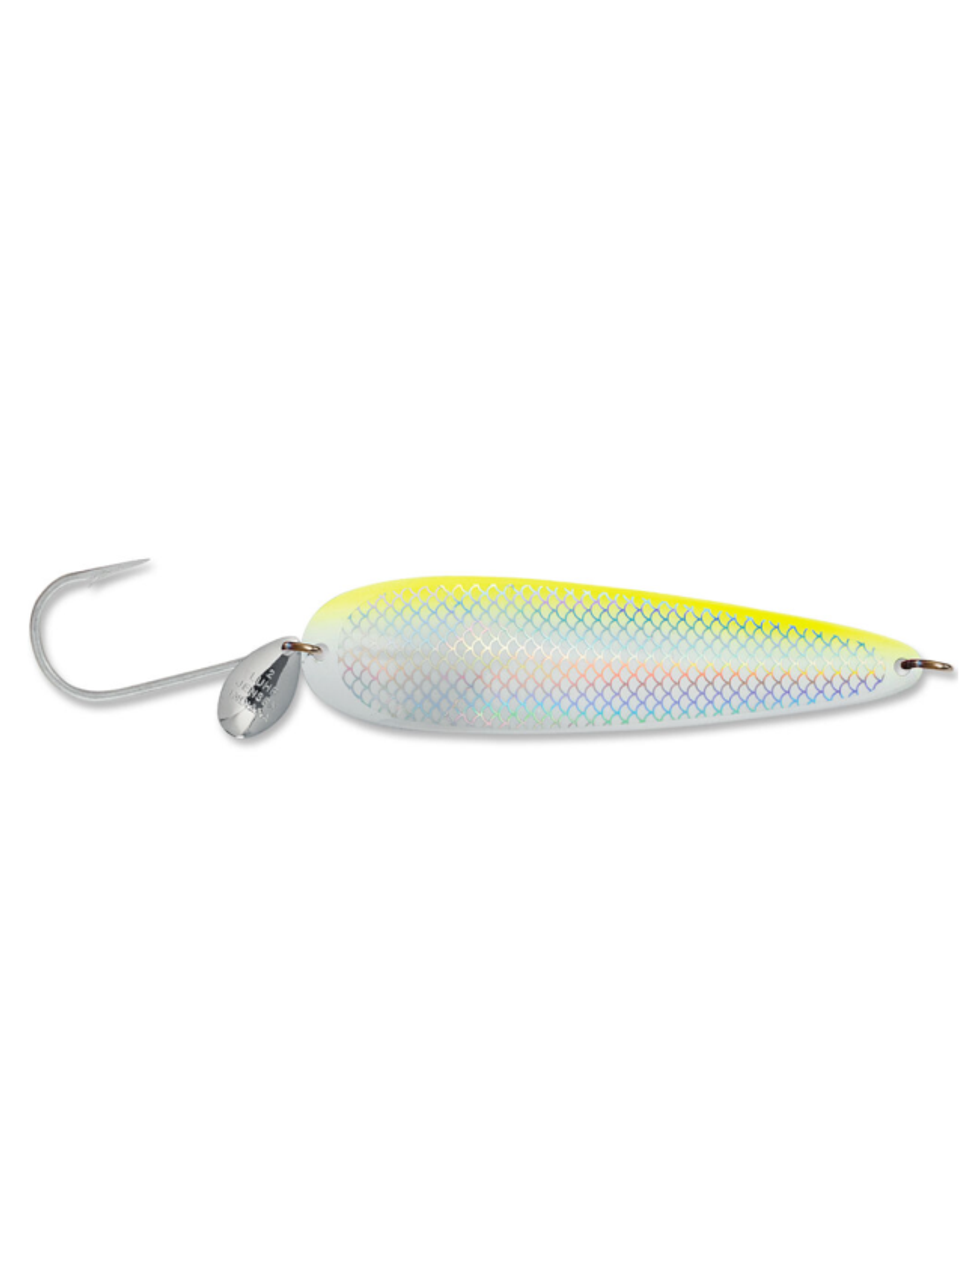 Luhr Jensen Coyote Spoon - Bad Attitude - The Harbour Chandler